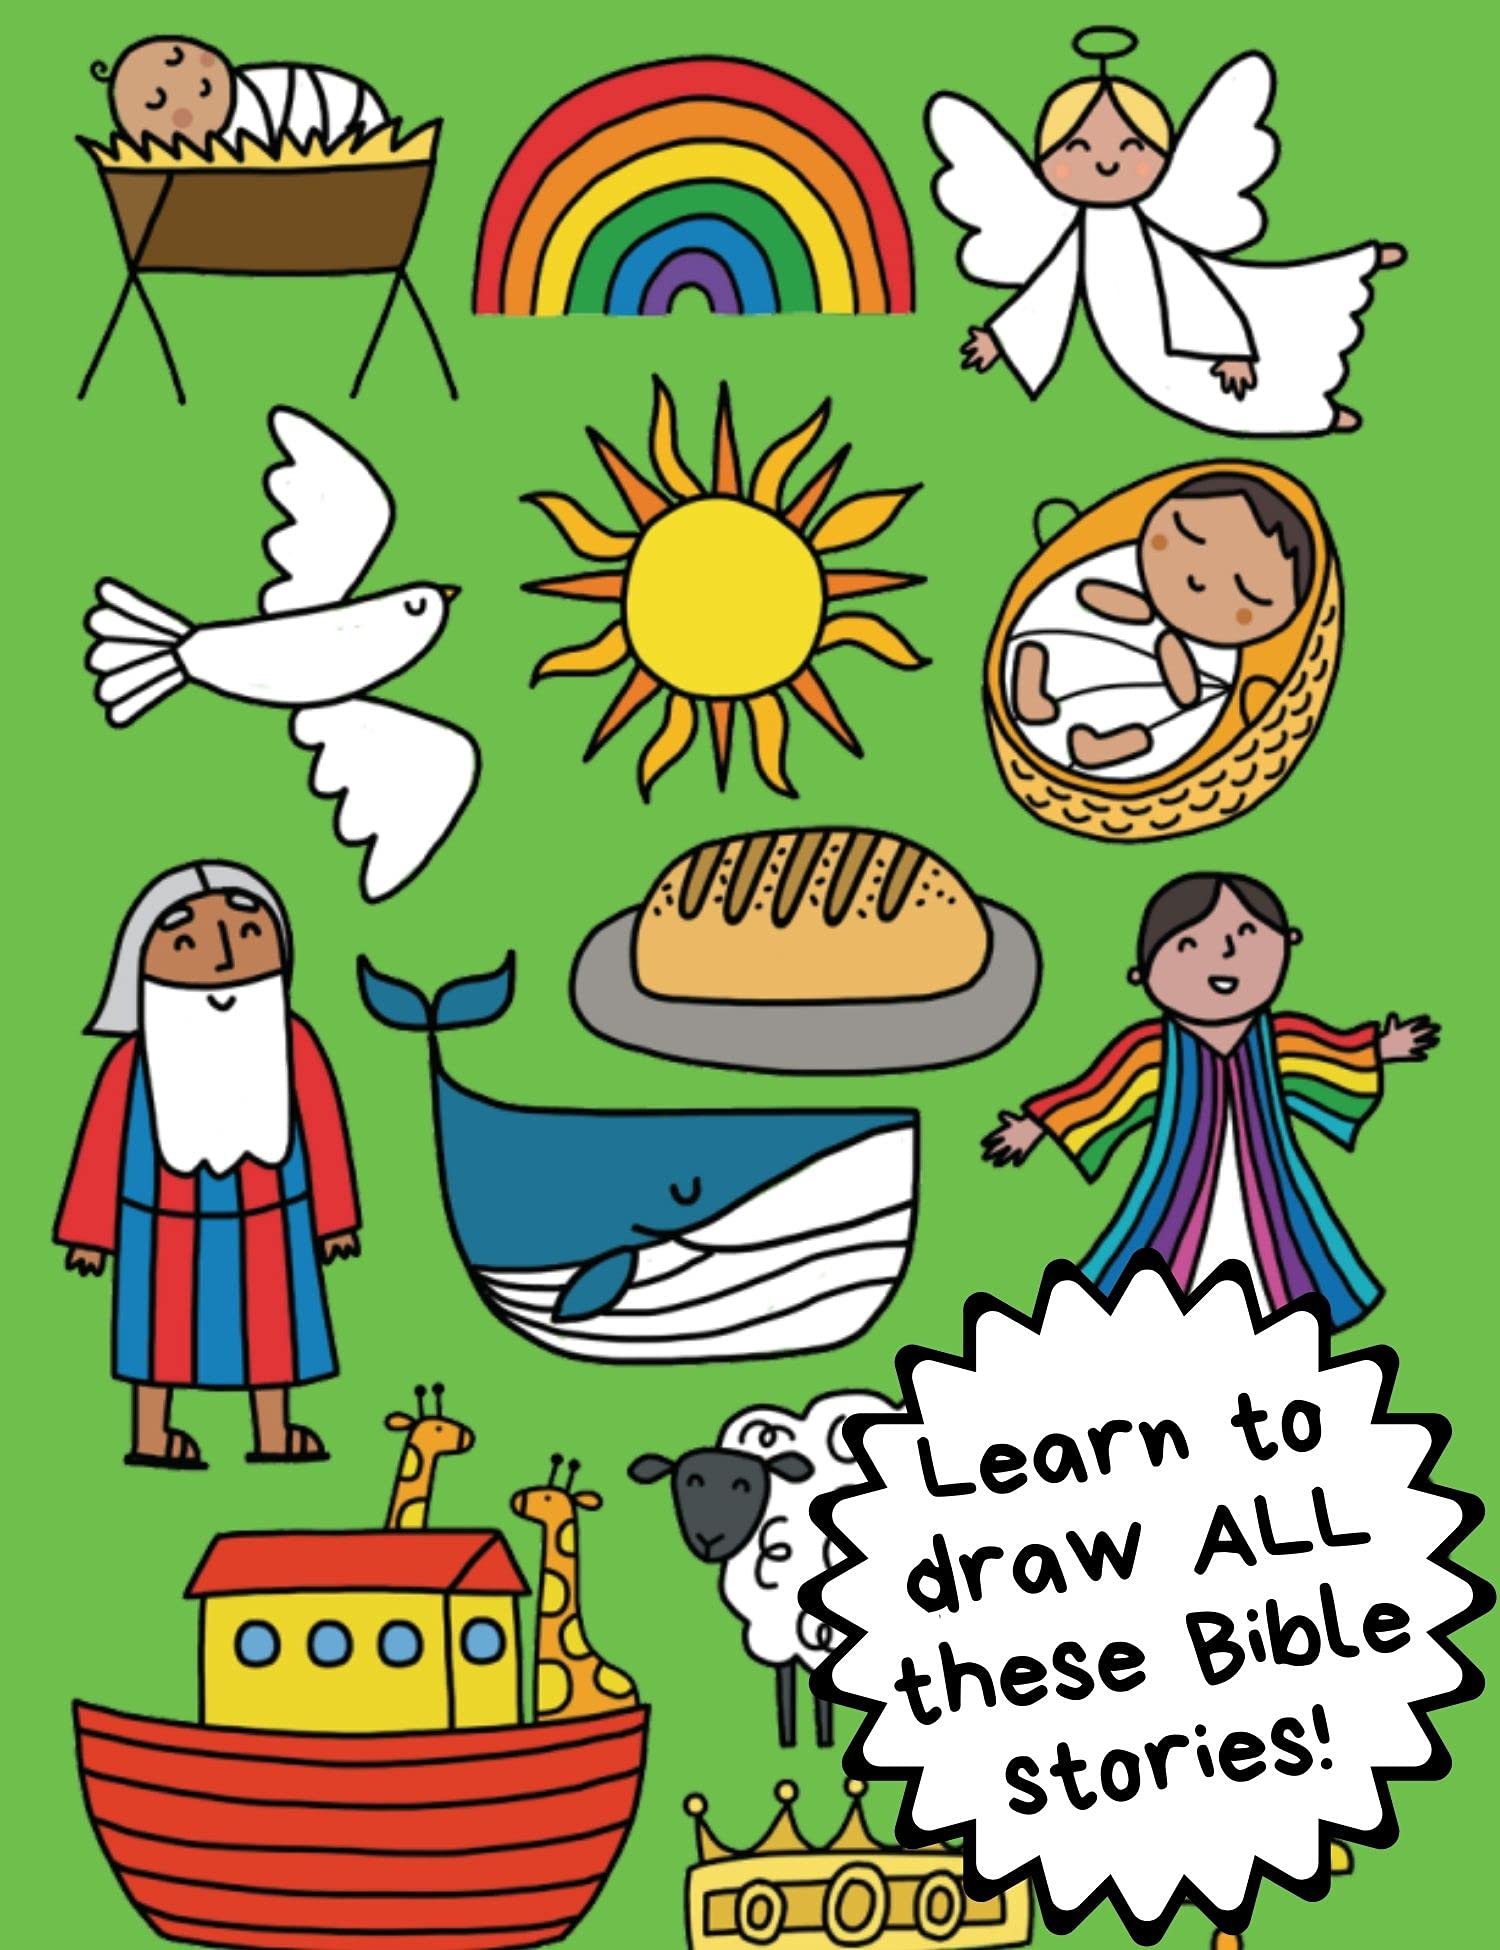 My First Learn-To-Draw: Bible Stories